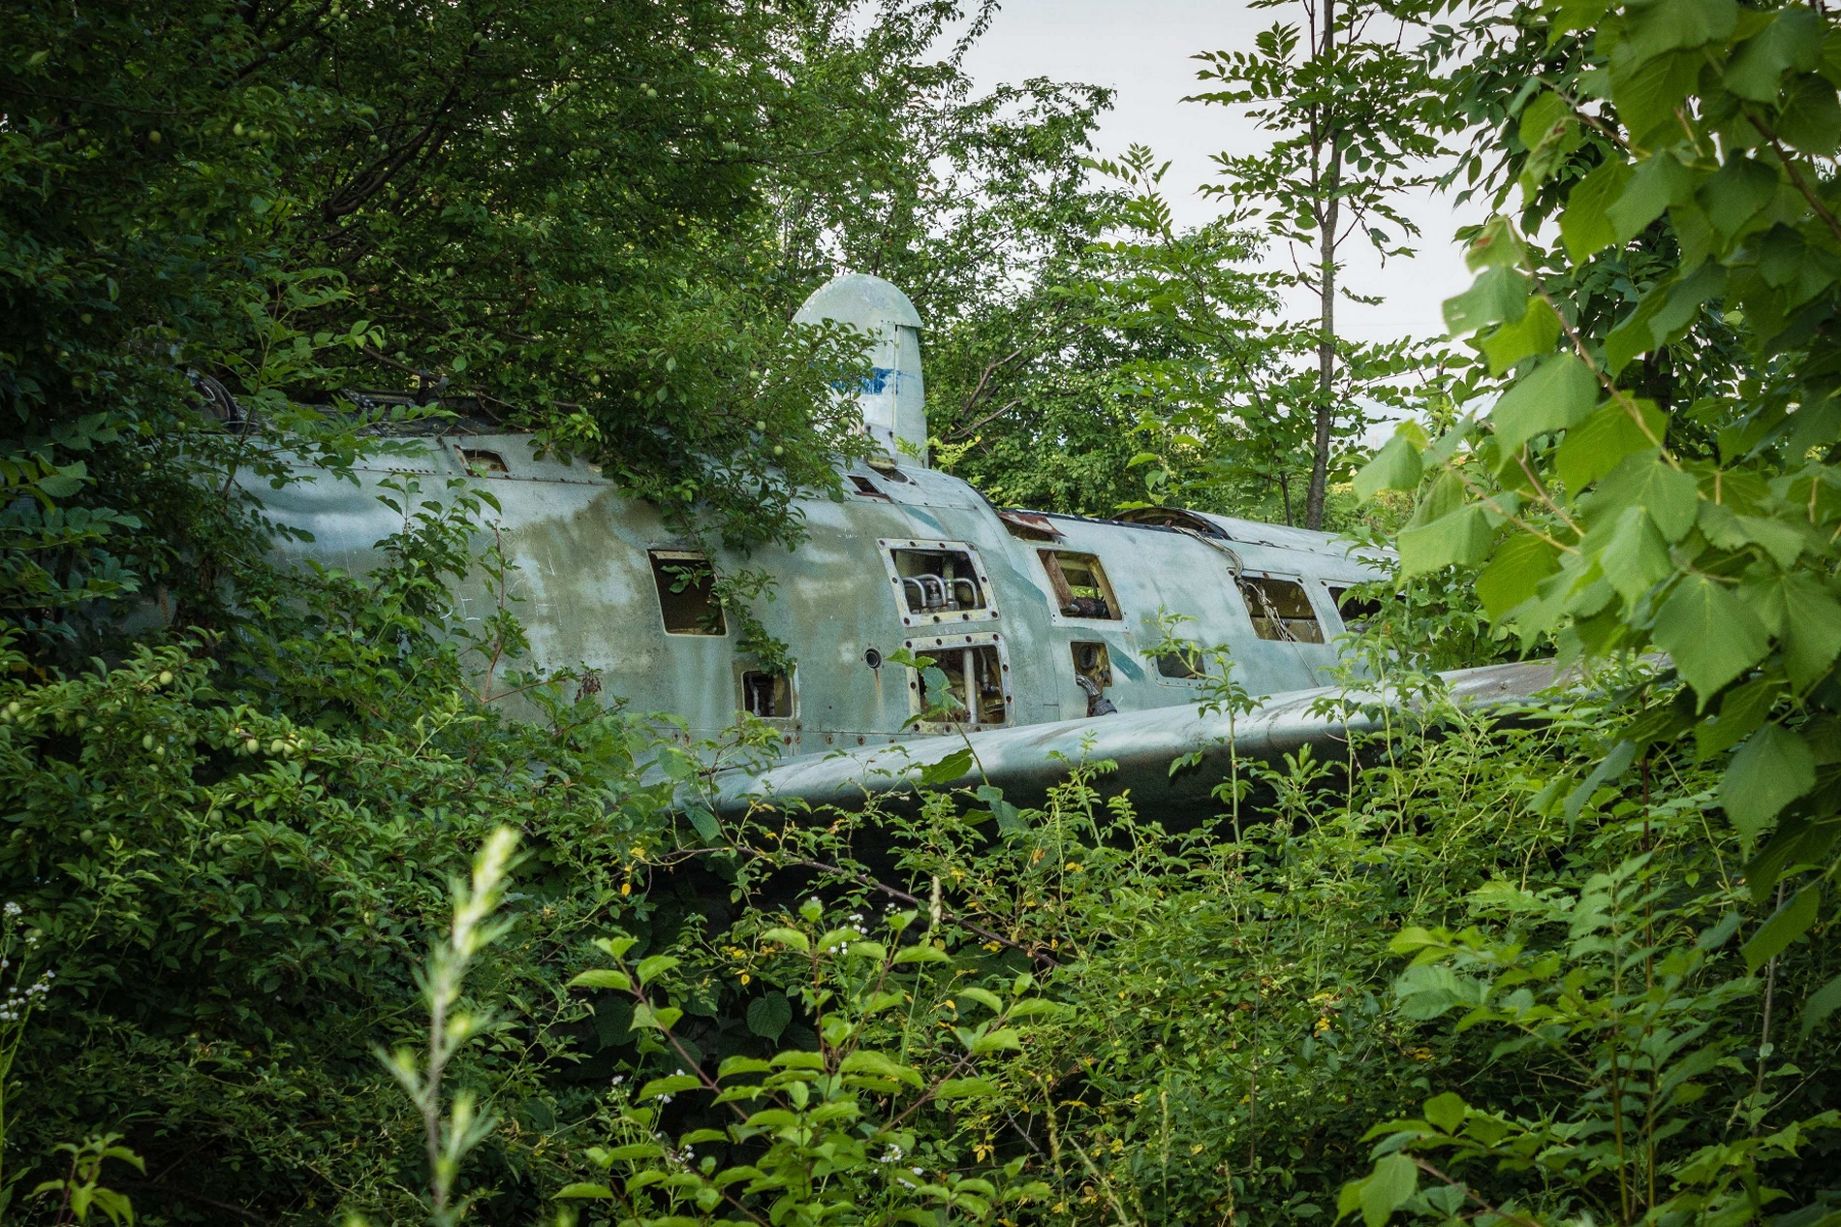 The remains of a plane in a part of the air base which has been reclaimed by nature over the decades